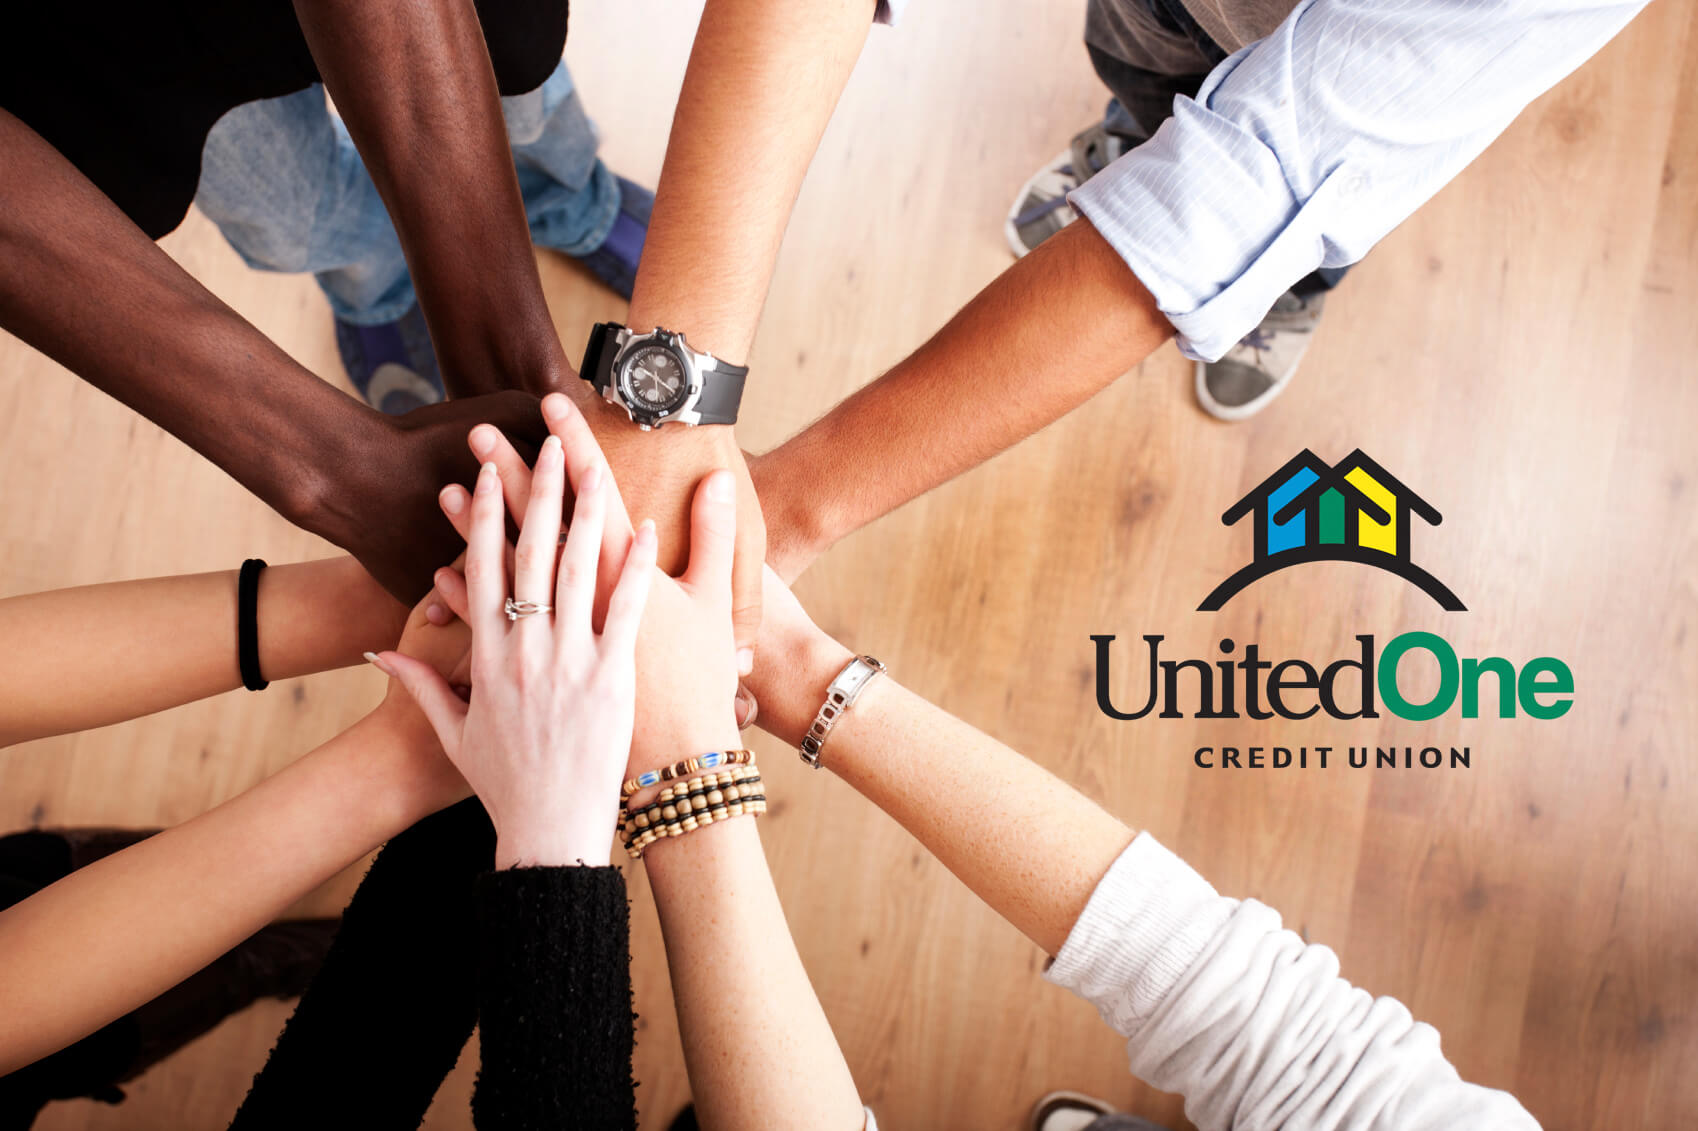 Group of people's hands as they huddle in a circle with UnitedOne Credit Union logo on the right.